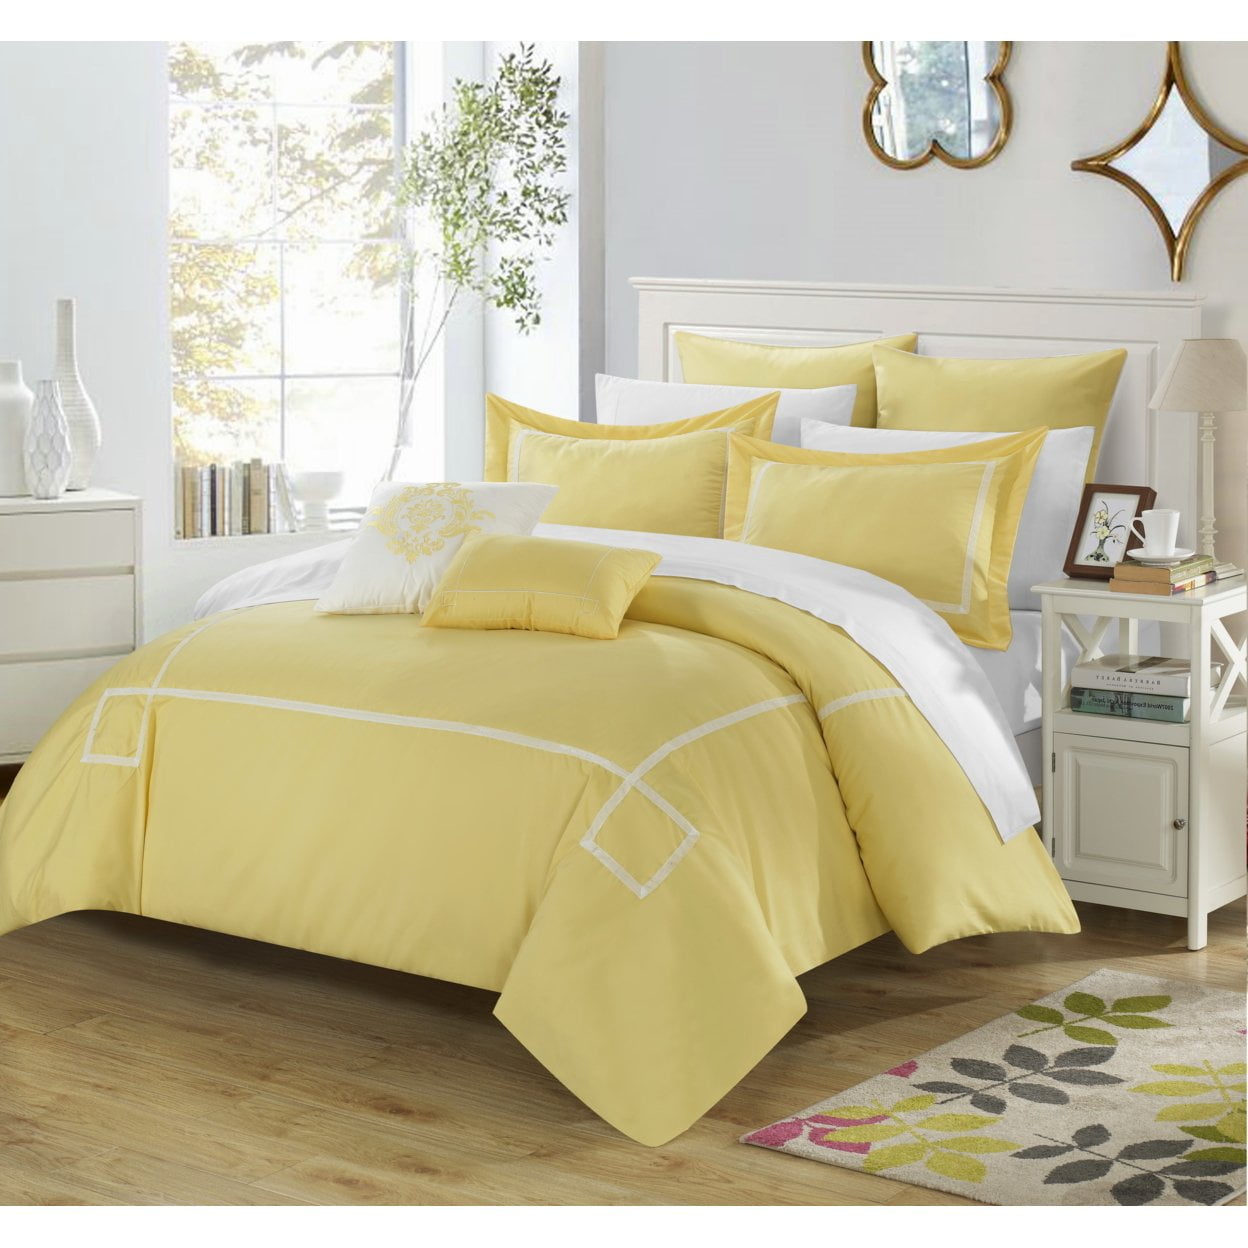 Cs0441-11-us Woodford Embroidered Comforter Set - Yellow - Queen - 7 Piece